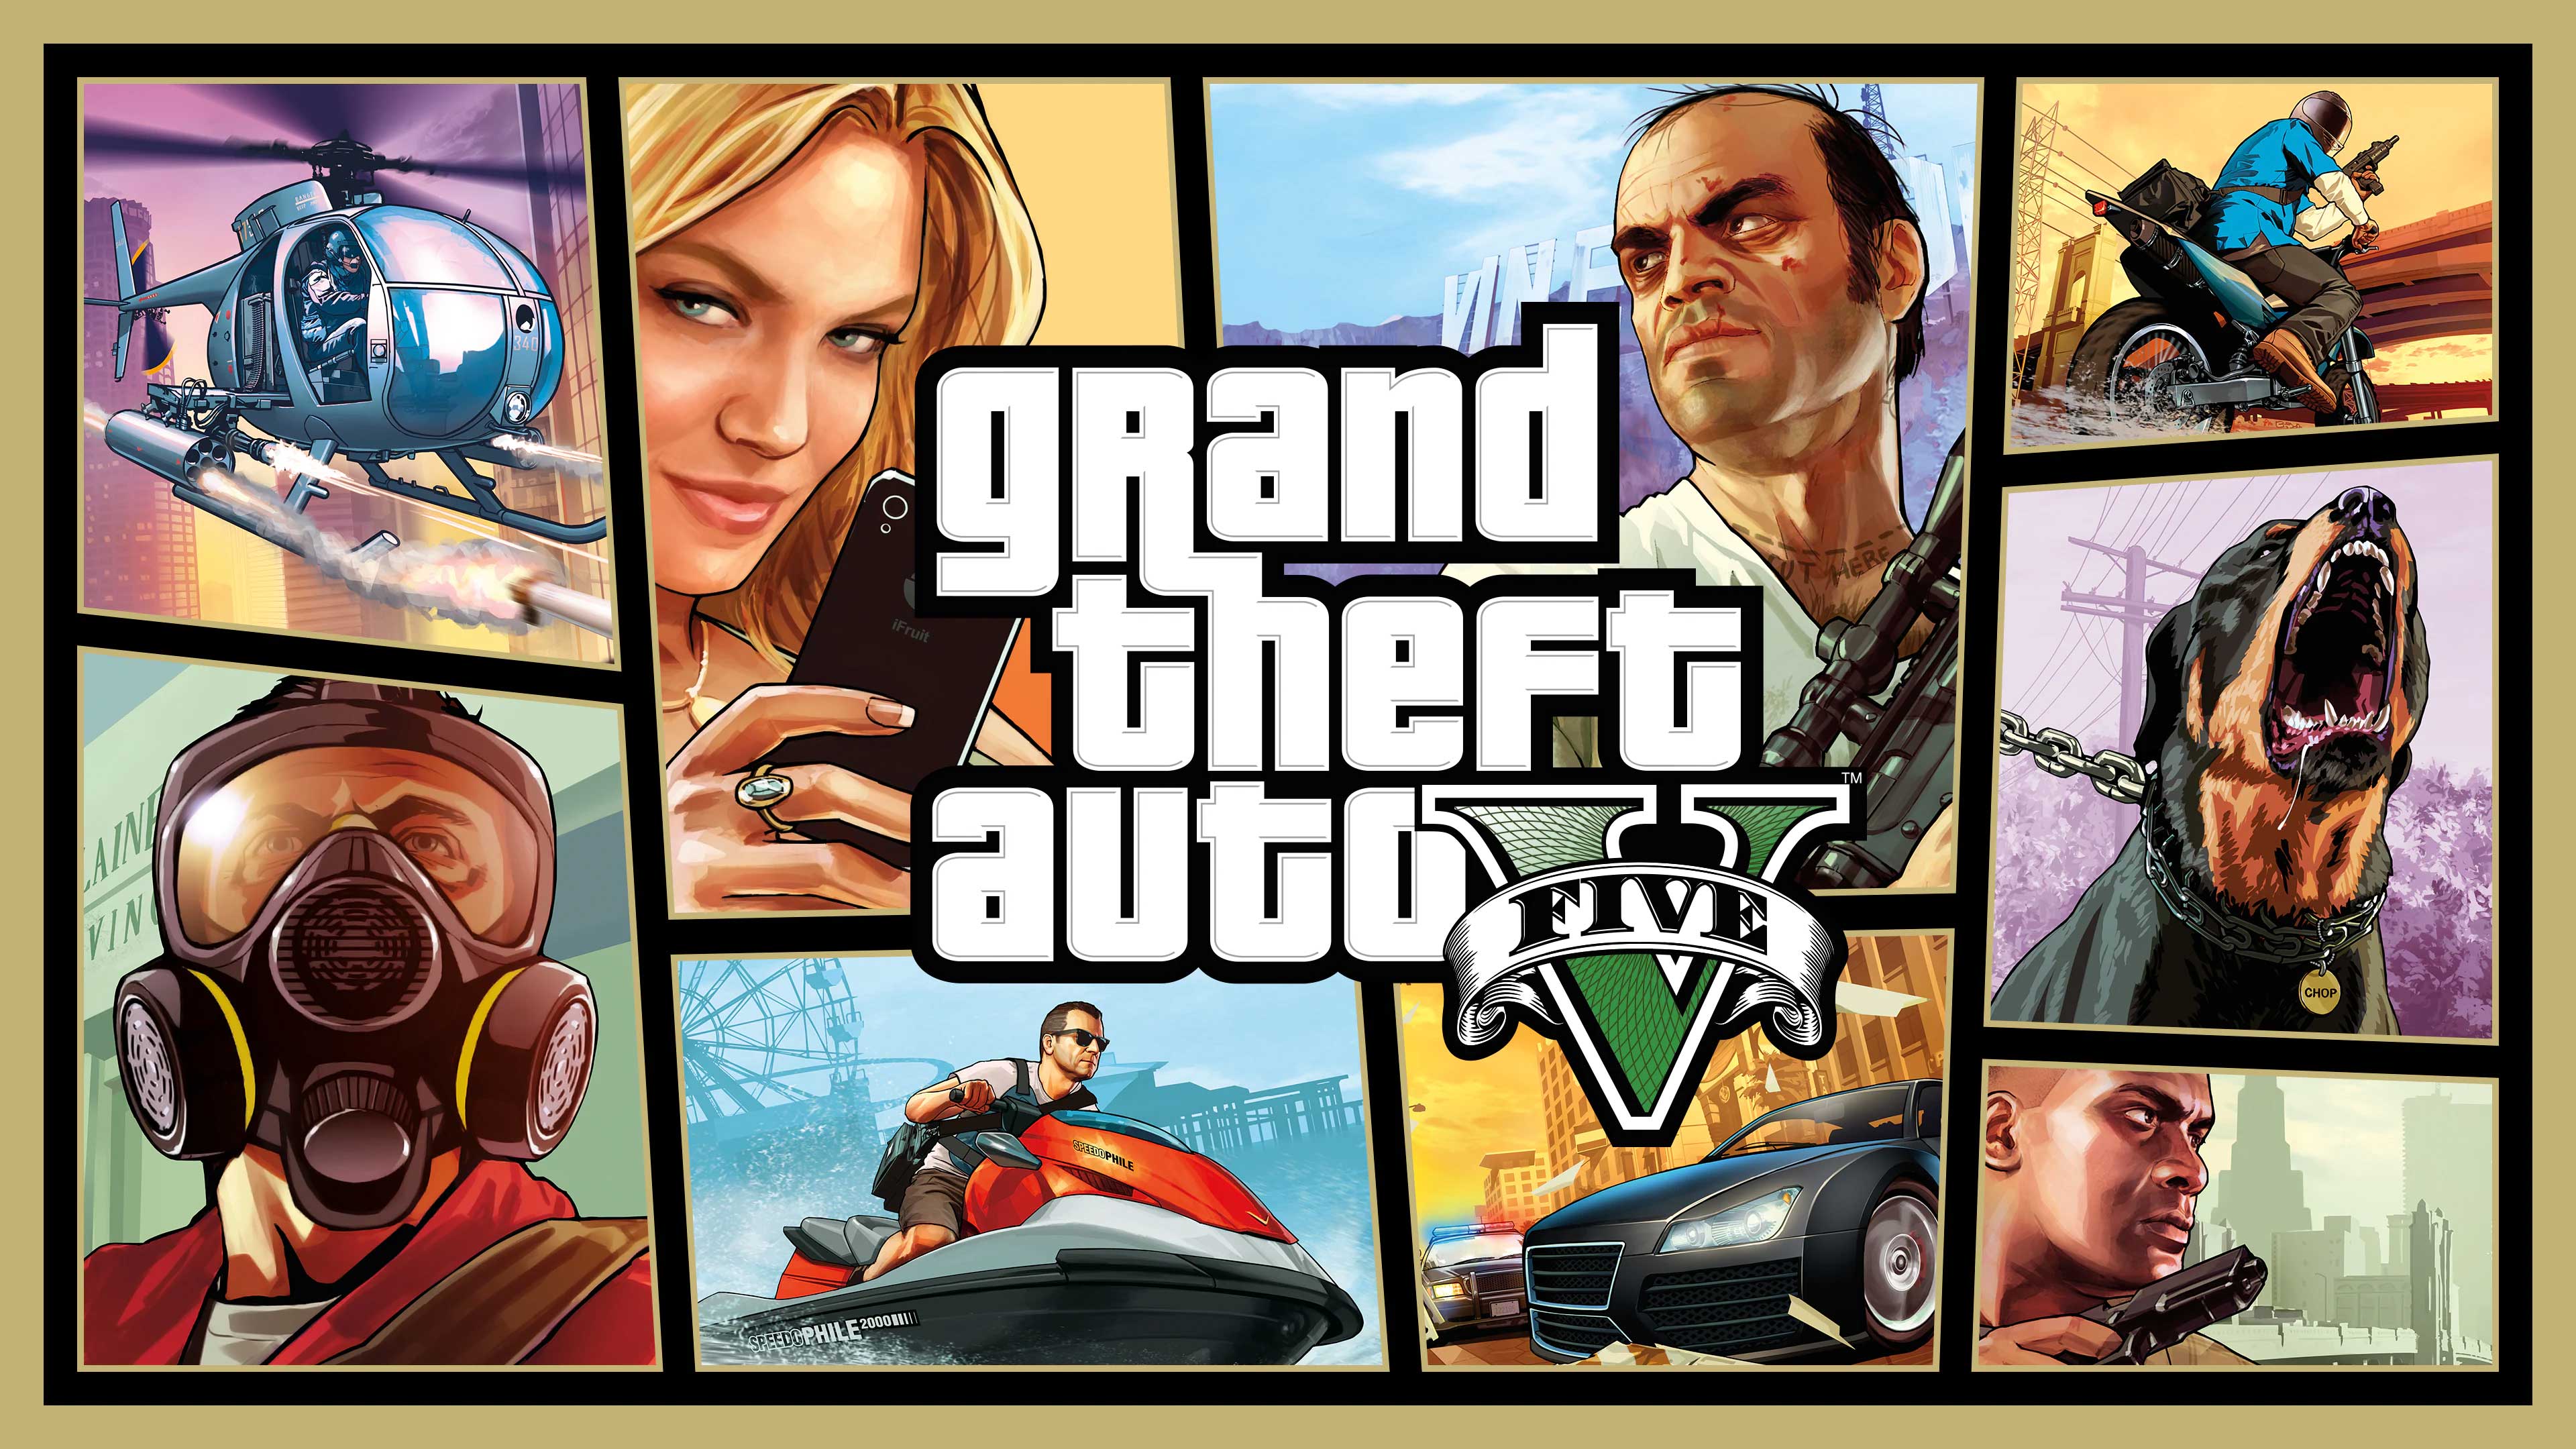 Grand Theft Auto V, Fast Paced Gifting , fastpacedgifting.com